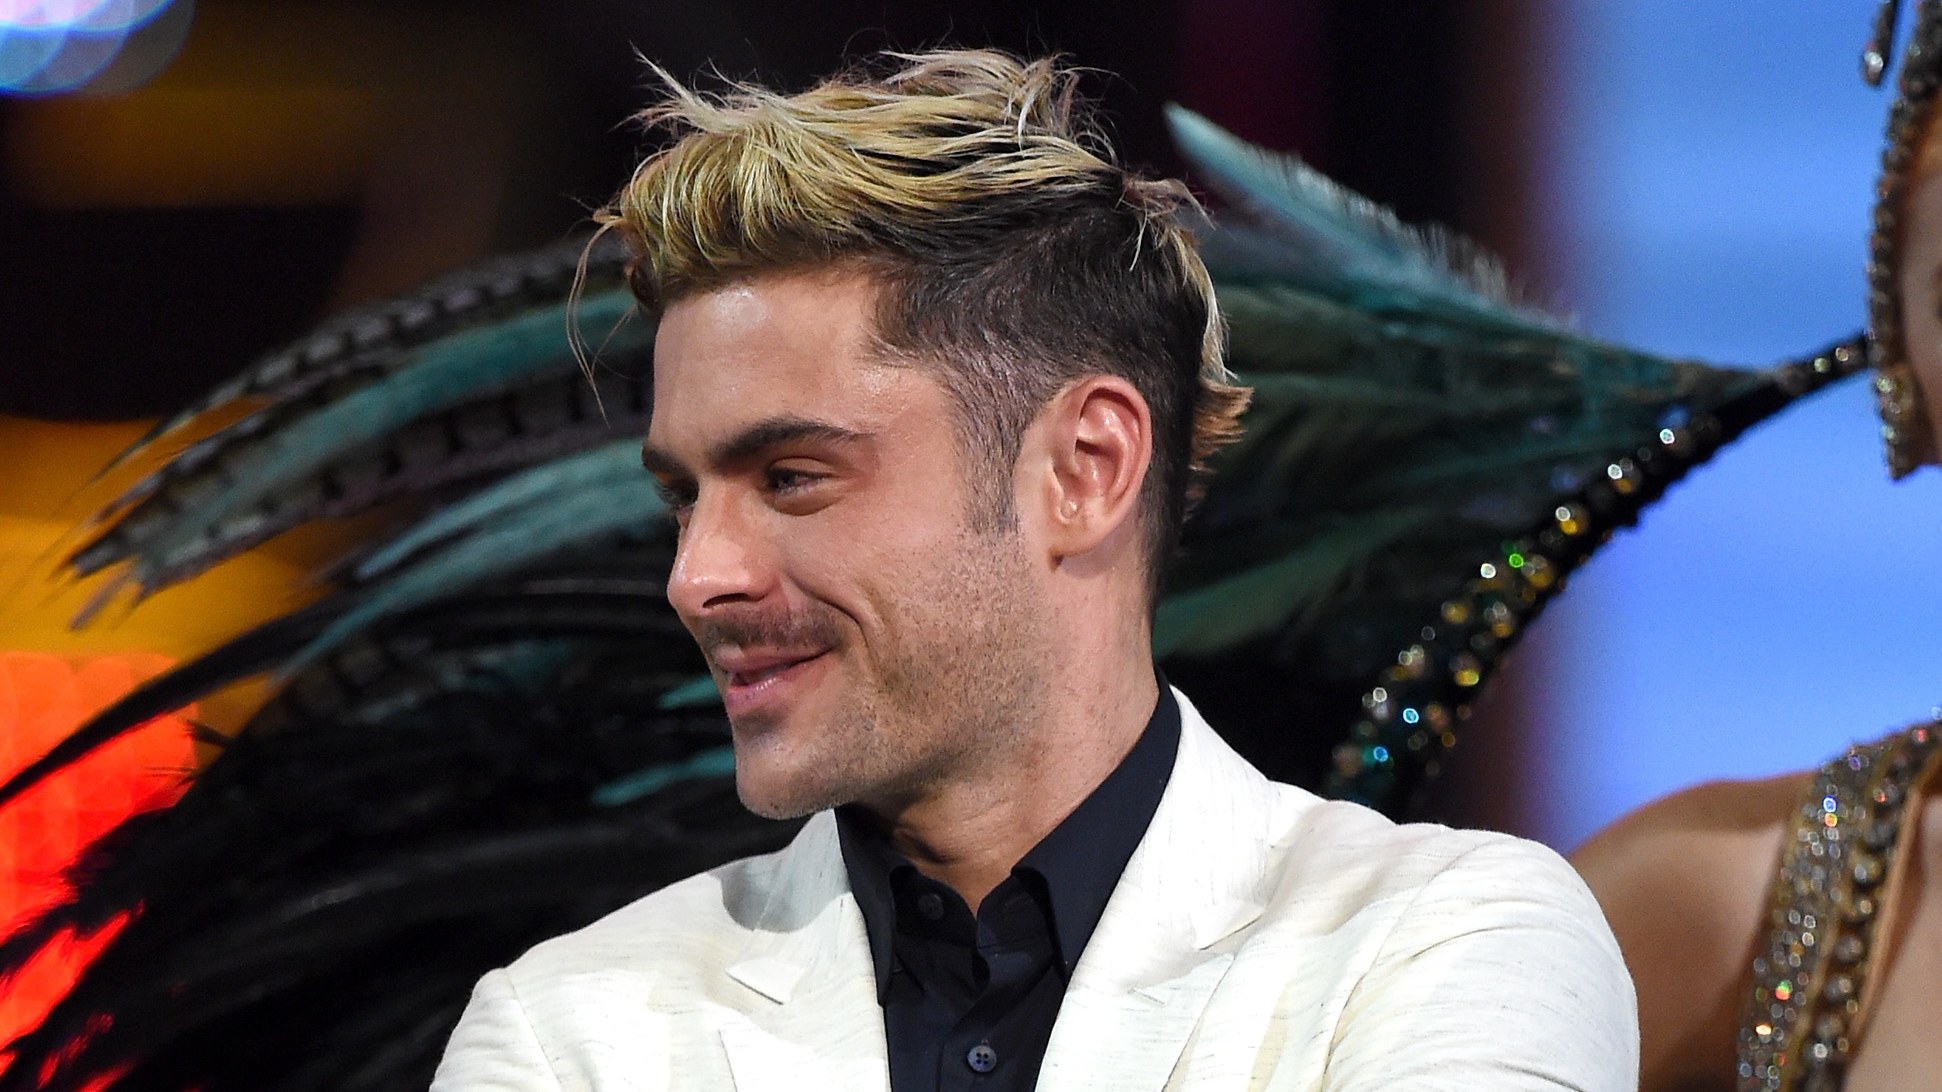 Top 20 Zac Efron Hairstyles We Love